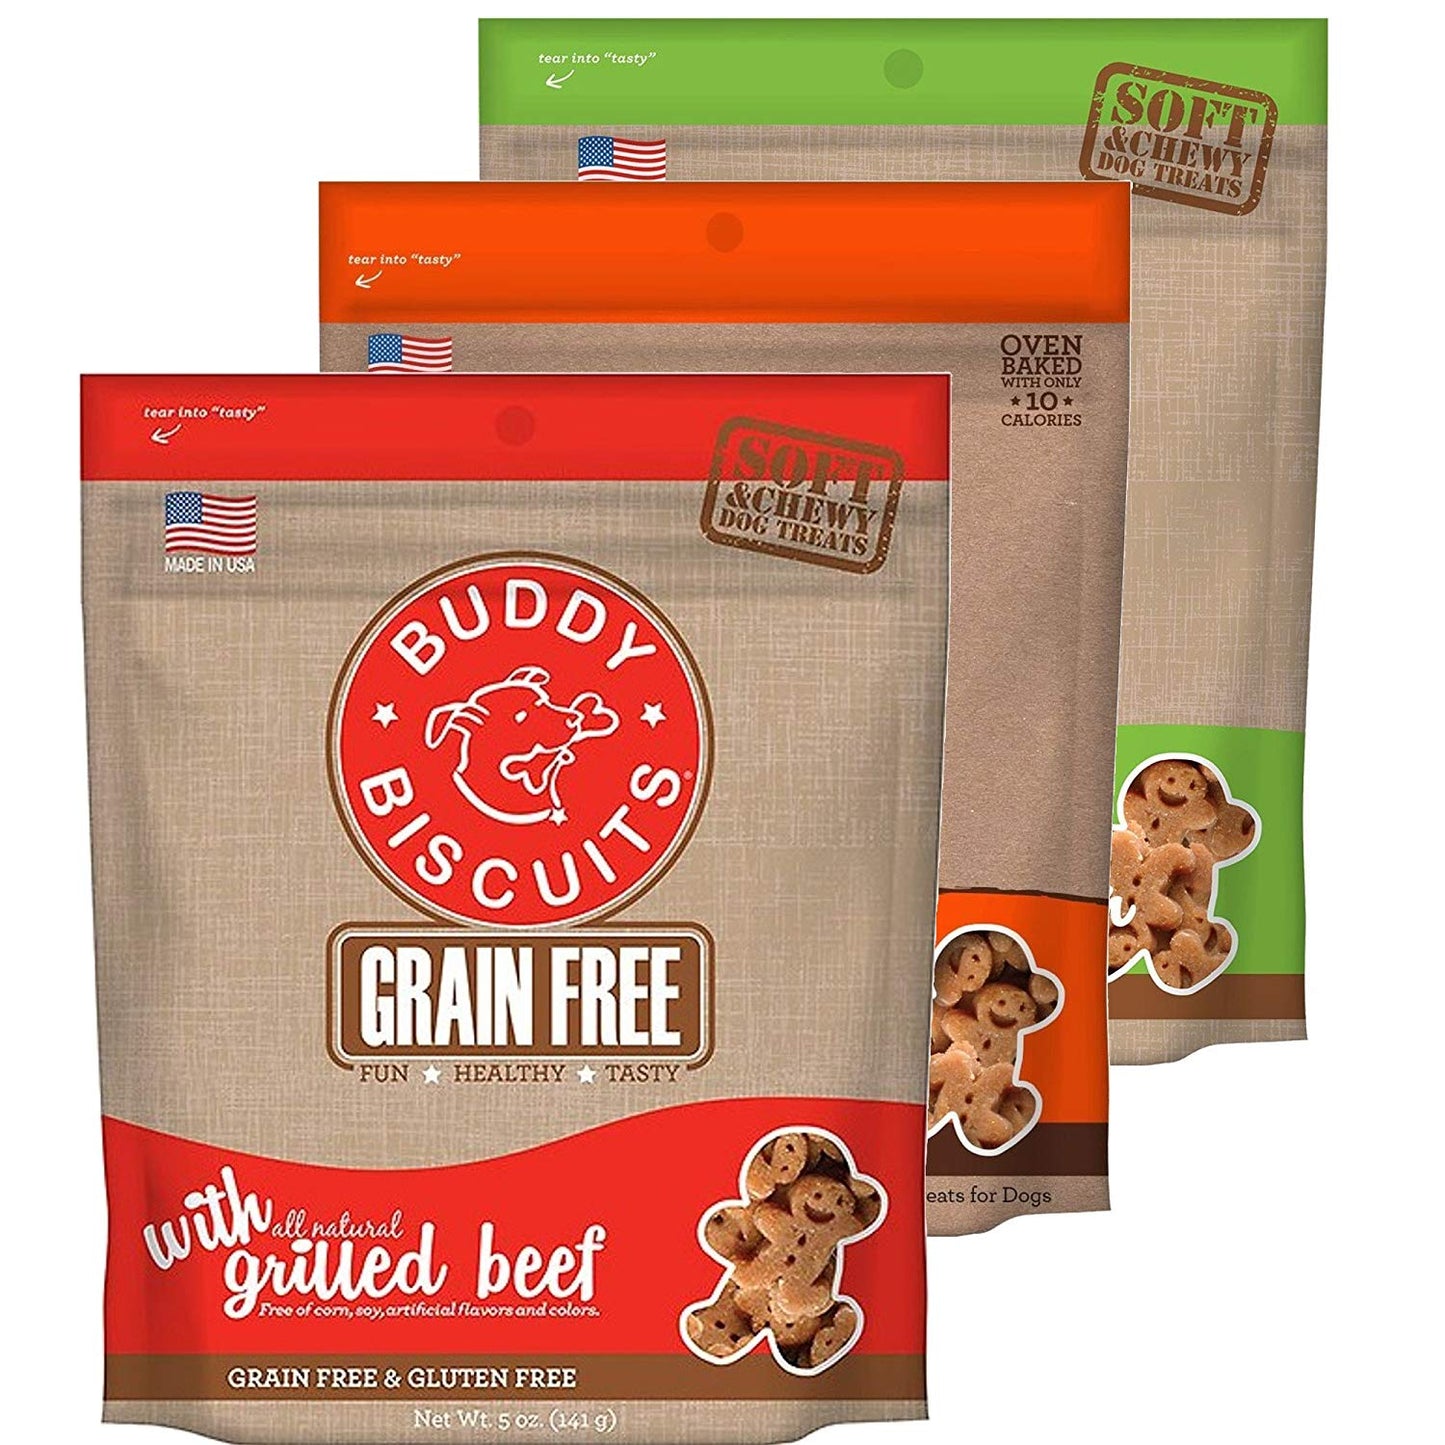 Buddy Biscuits Grain Free Soft & Chewy Dog Treats 5 oz Each